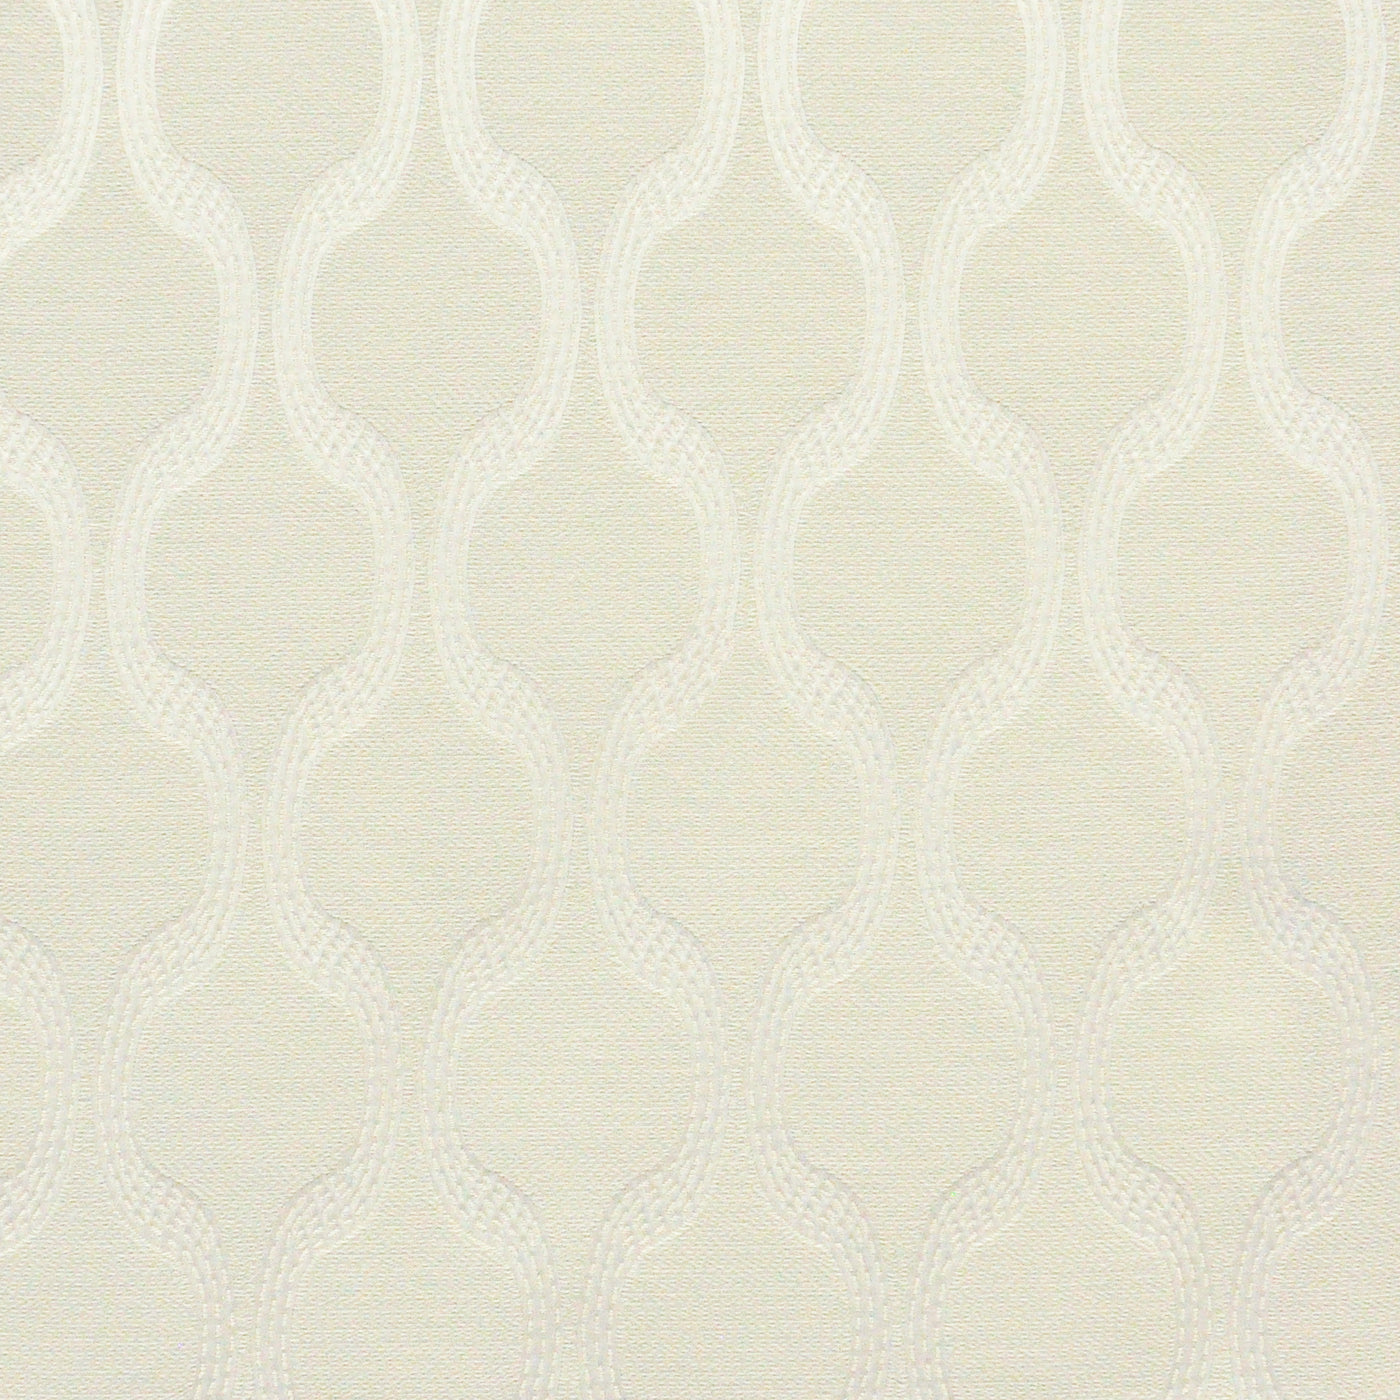 Purchase Maxwell Fabric - Cyrus, # 236 Cloud